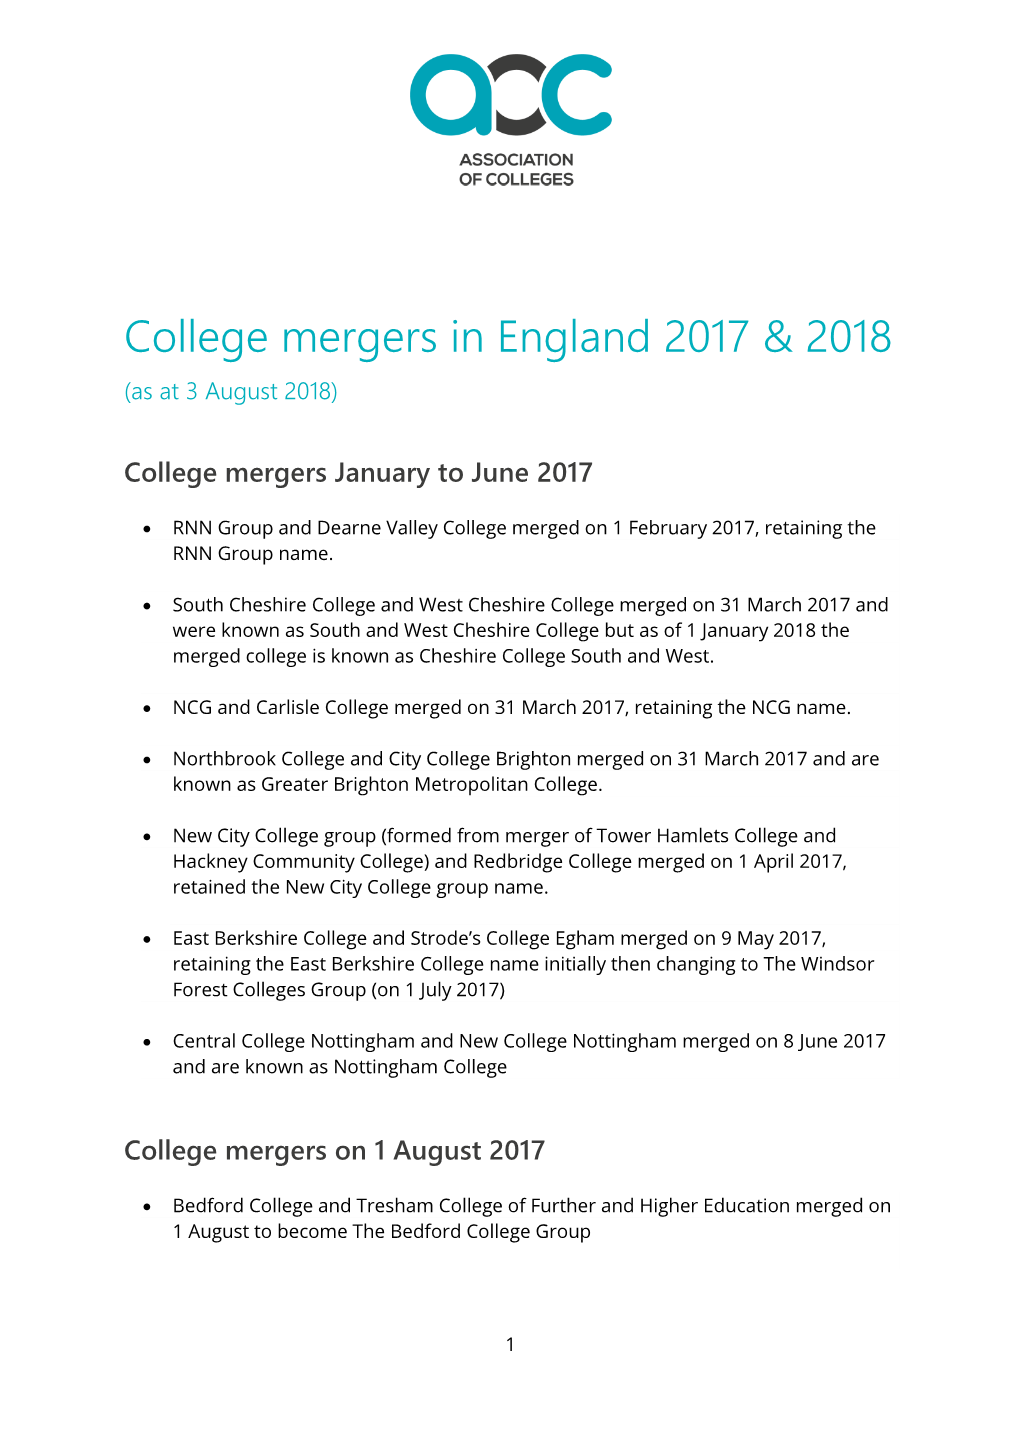 College Mergers in England 2017 & 2018